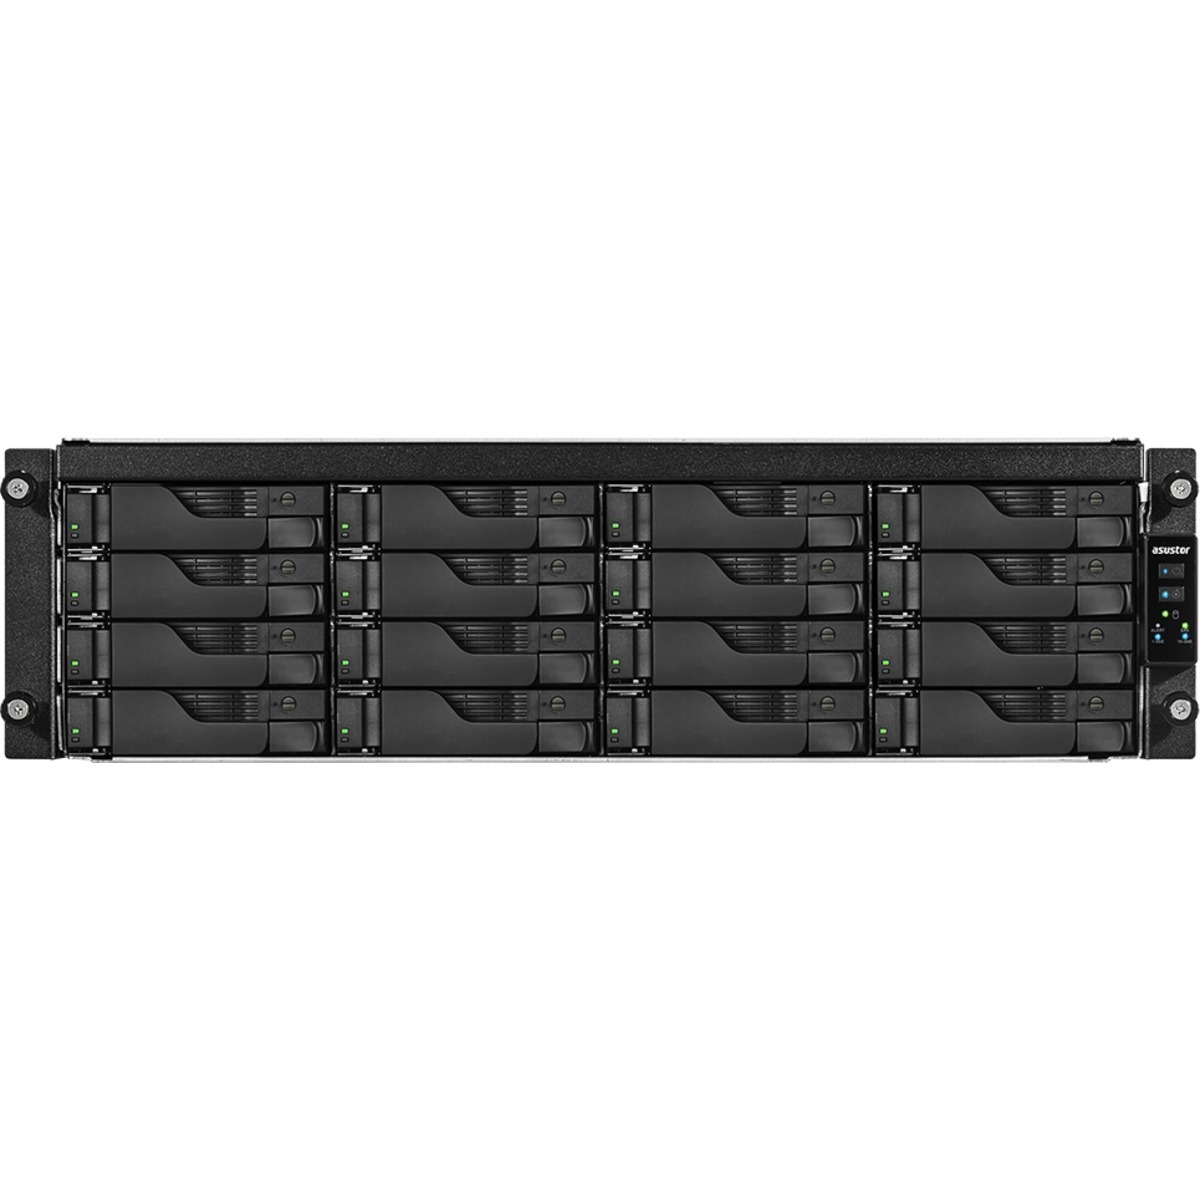 buy $14843 ASUSTOR AS7116RDX Lockerstor 16R Pro 352tb RackMount NAS - Network Attached Storage Device 16x22000gb Western Digital Red Pro WD221KFGX 3.5 7200rpm SATA 6Gb/s HDD NAS Class Drives Installed - Burn-In Tested - ON SALE - nas headquarters buy network attached storage server device das new raid-5 free shipping simply usa AS7116RDX Lockerstor 16R Pro